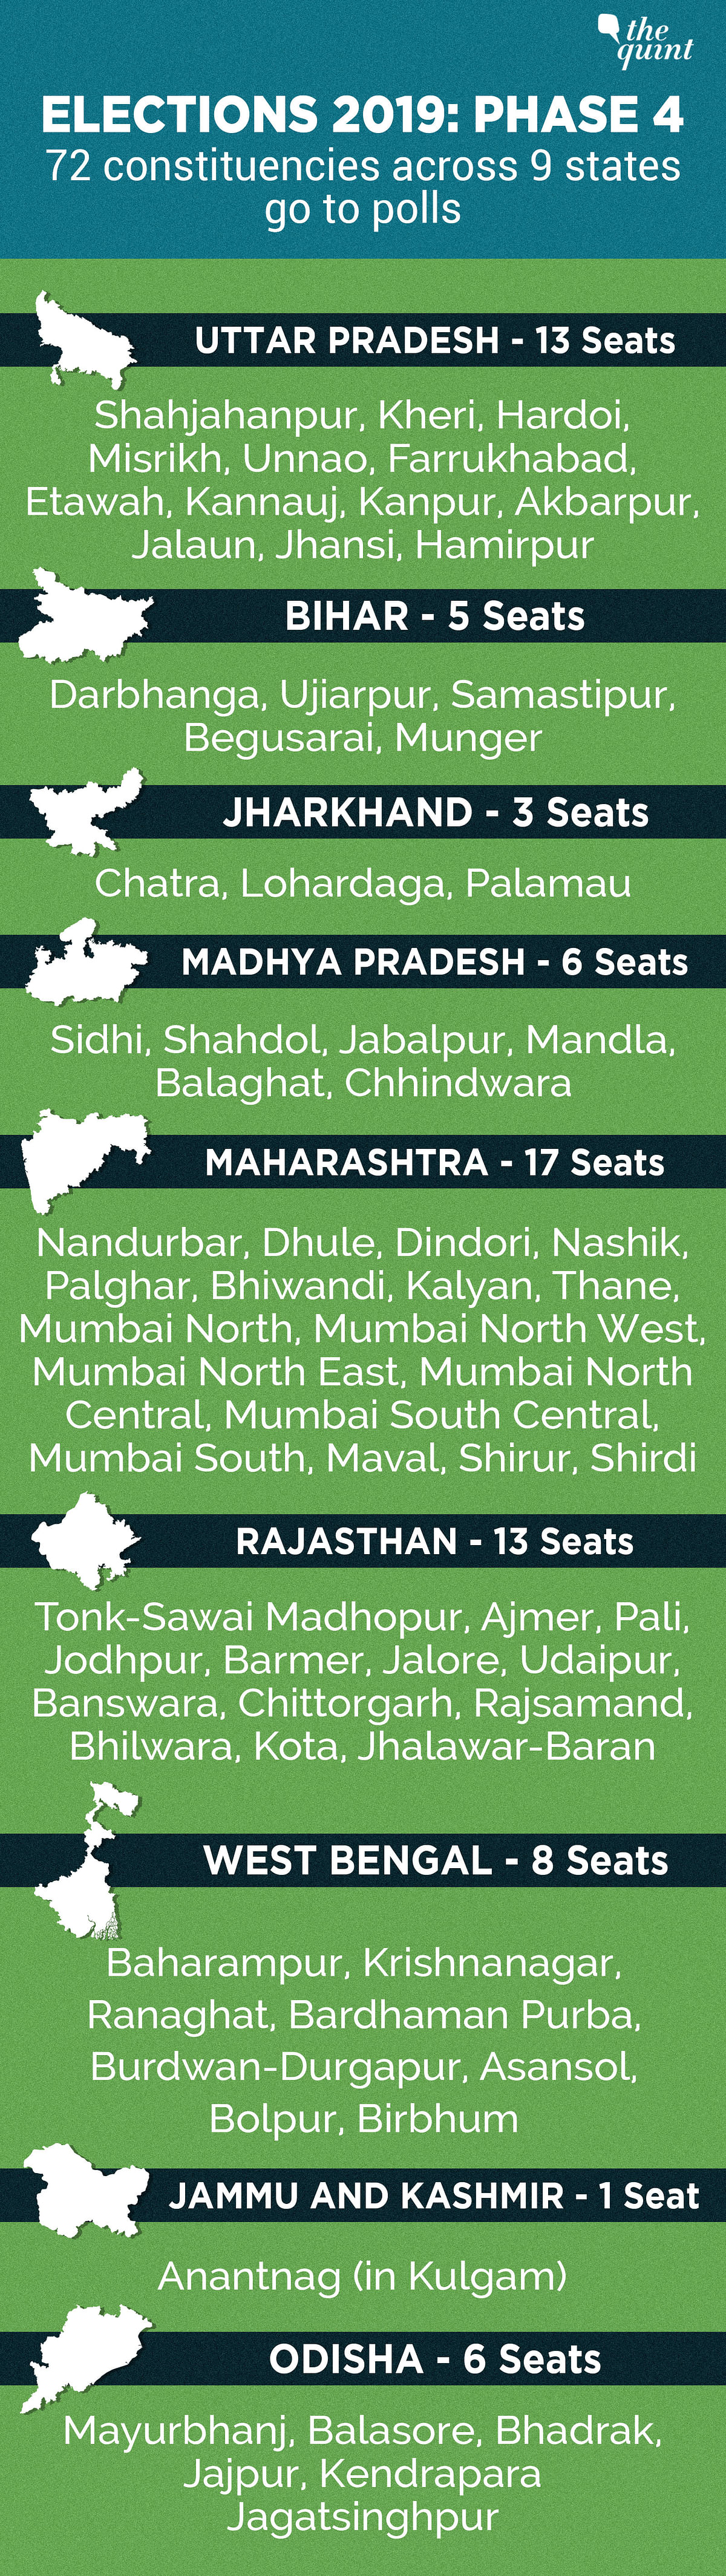 Here’s a full list of constituencies voting in the phase 4 of the 2019 Lok Sabha elections.